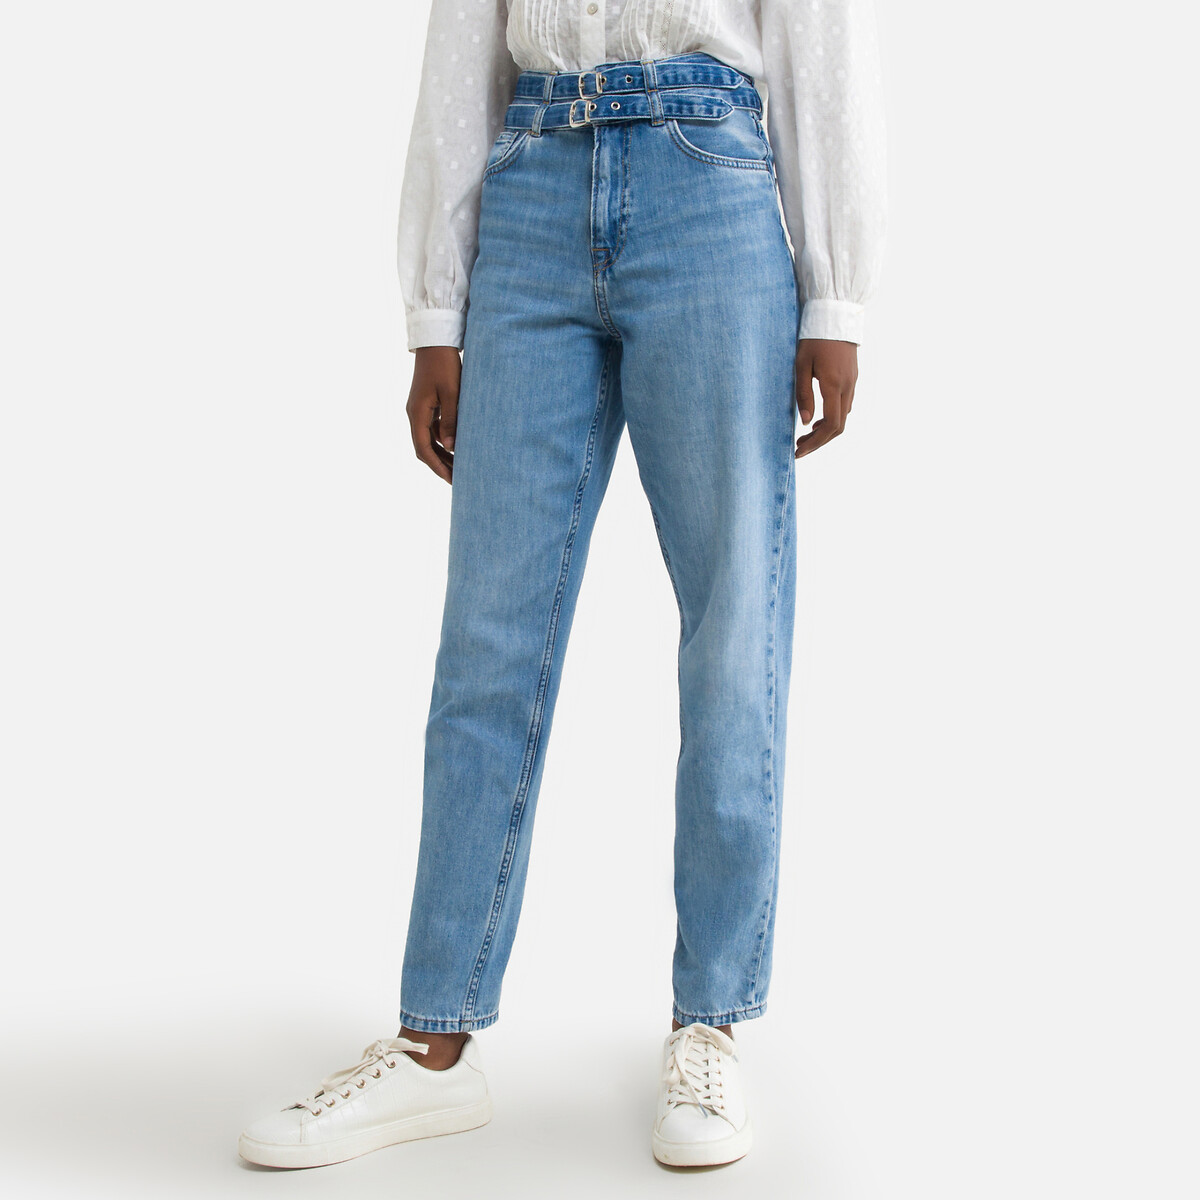 Pepe jeans Mom jeans, hoge taille